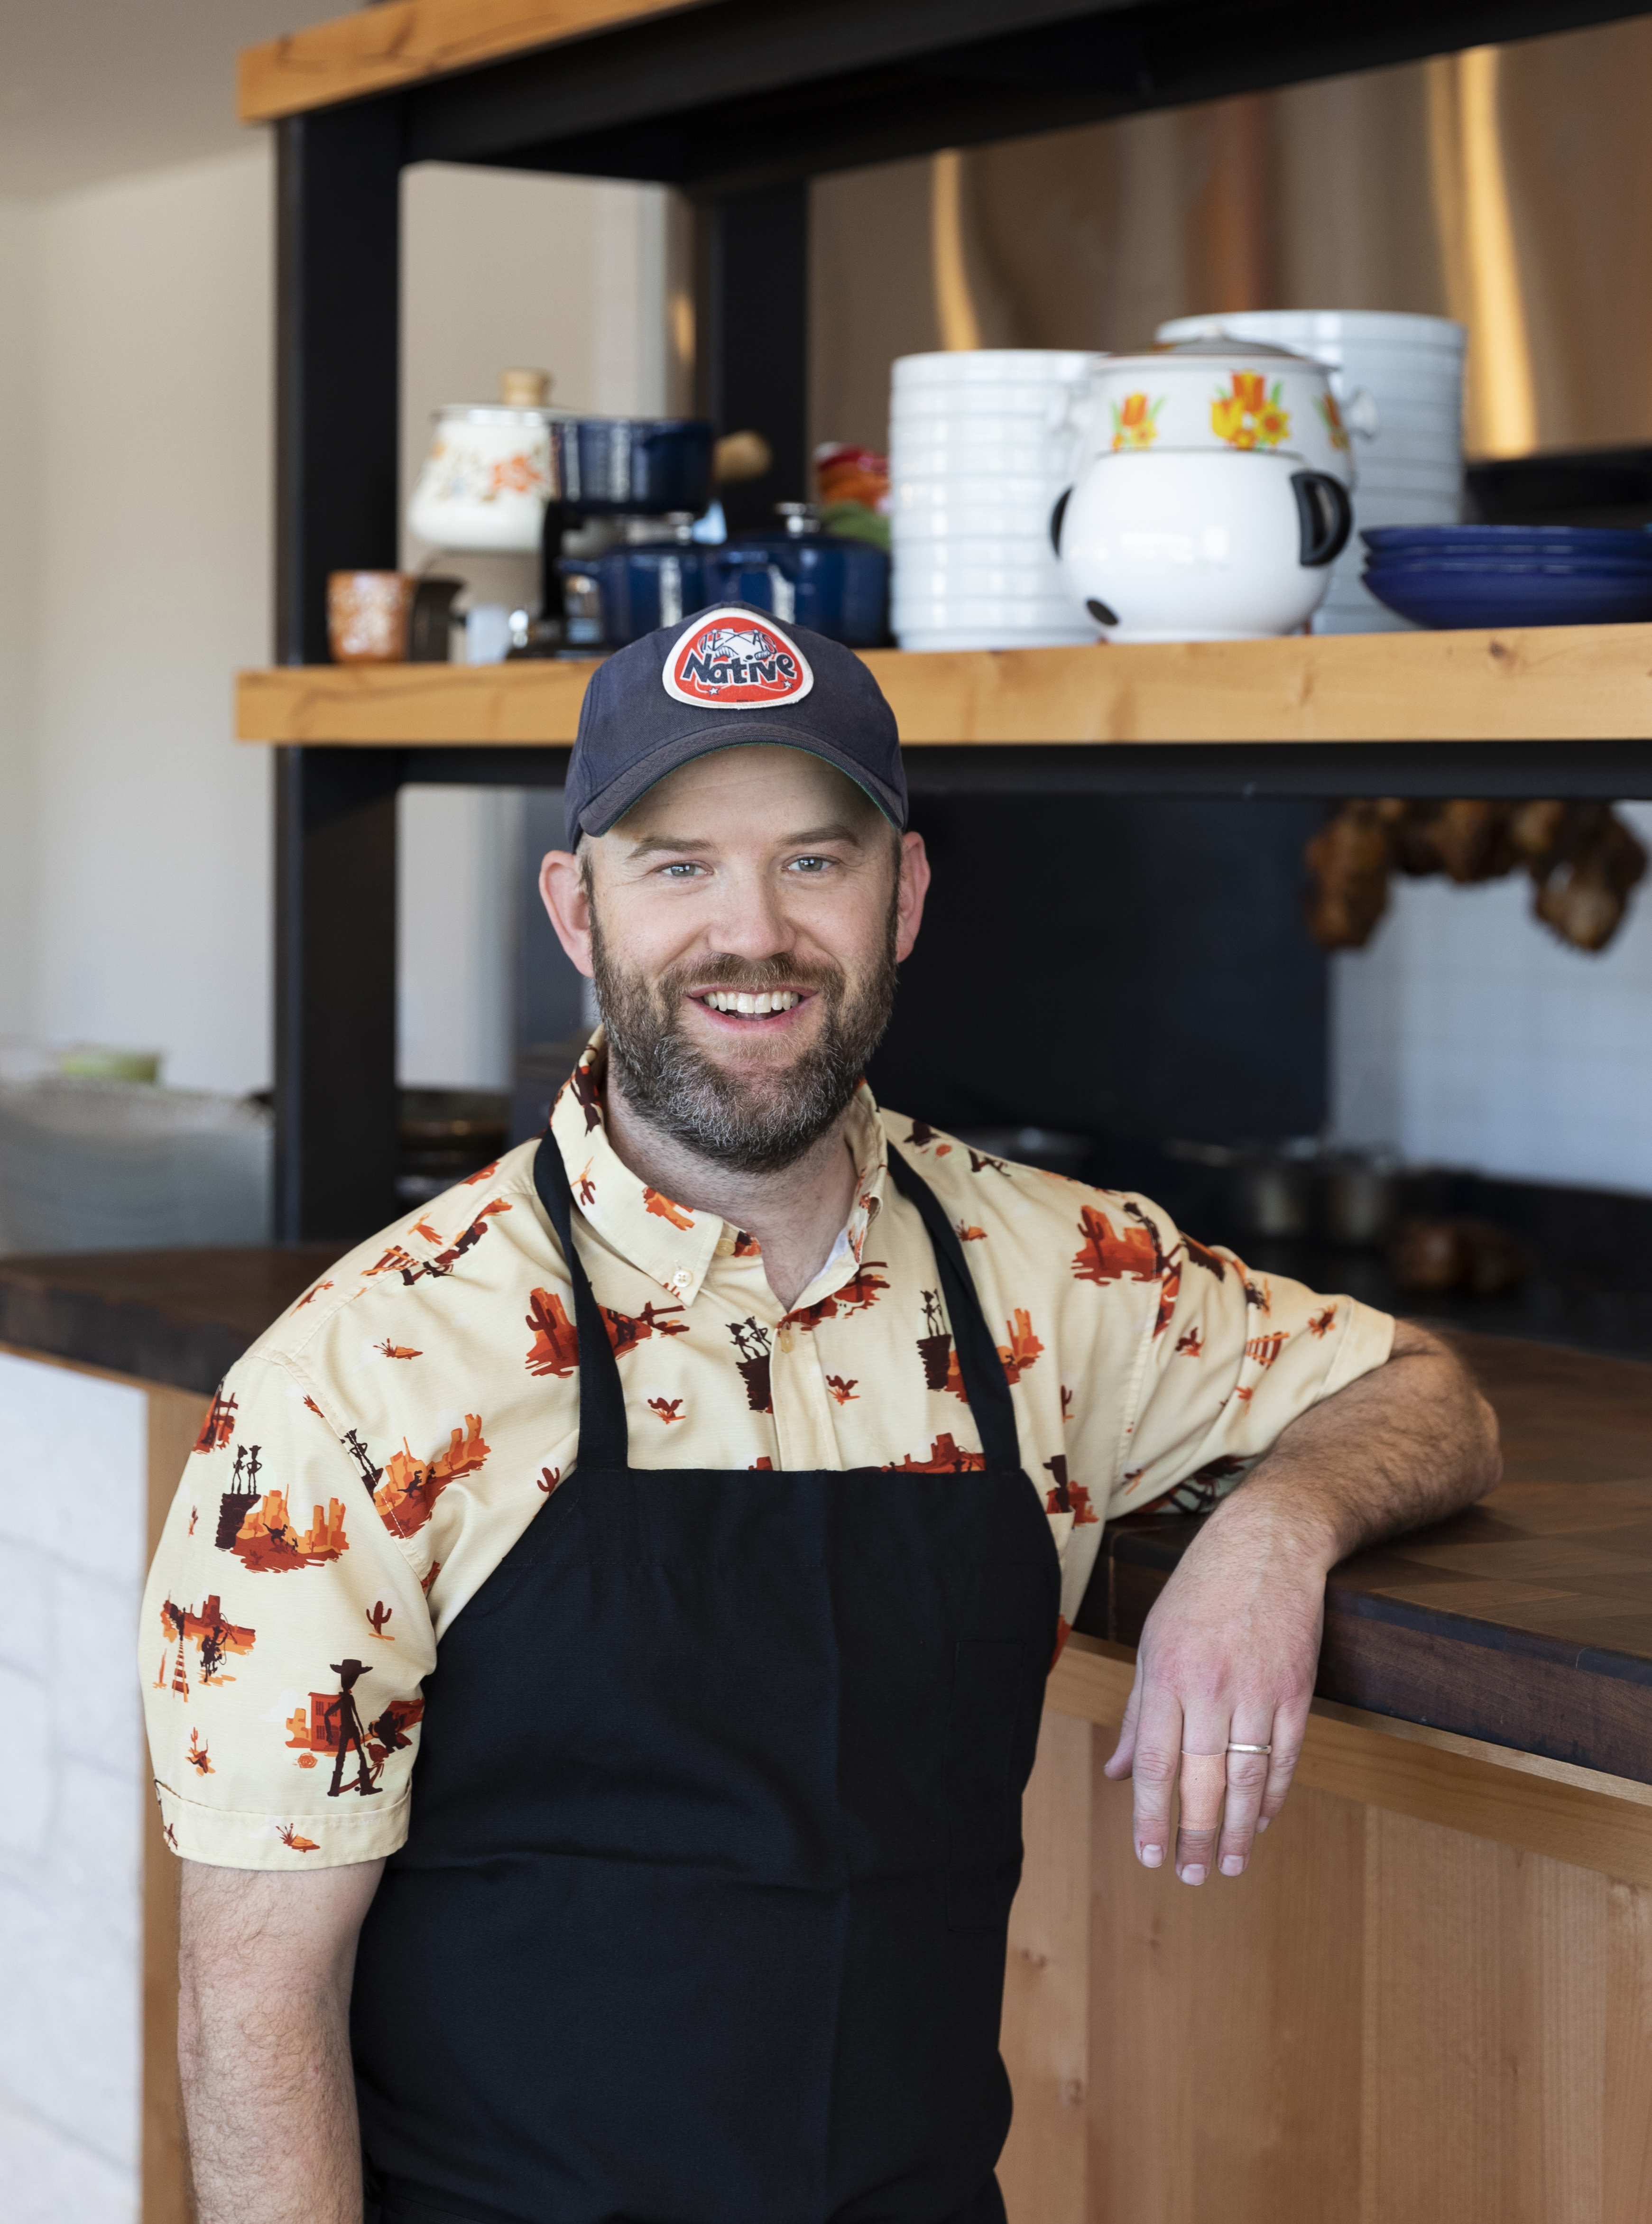 A headshot of chef Nick Fine in an apron.